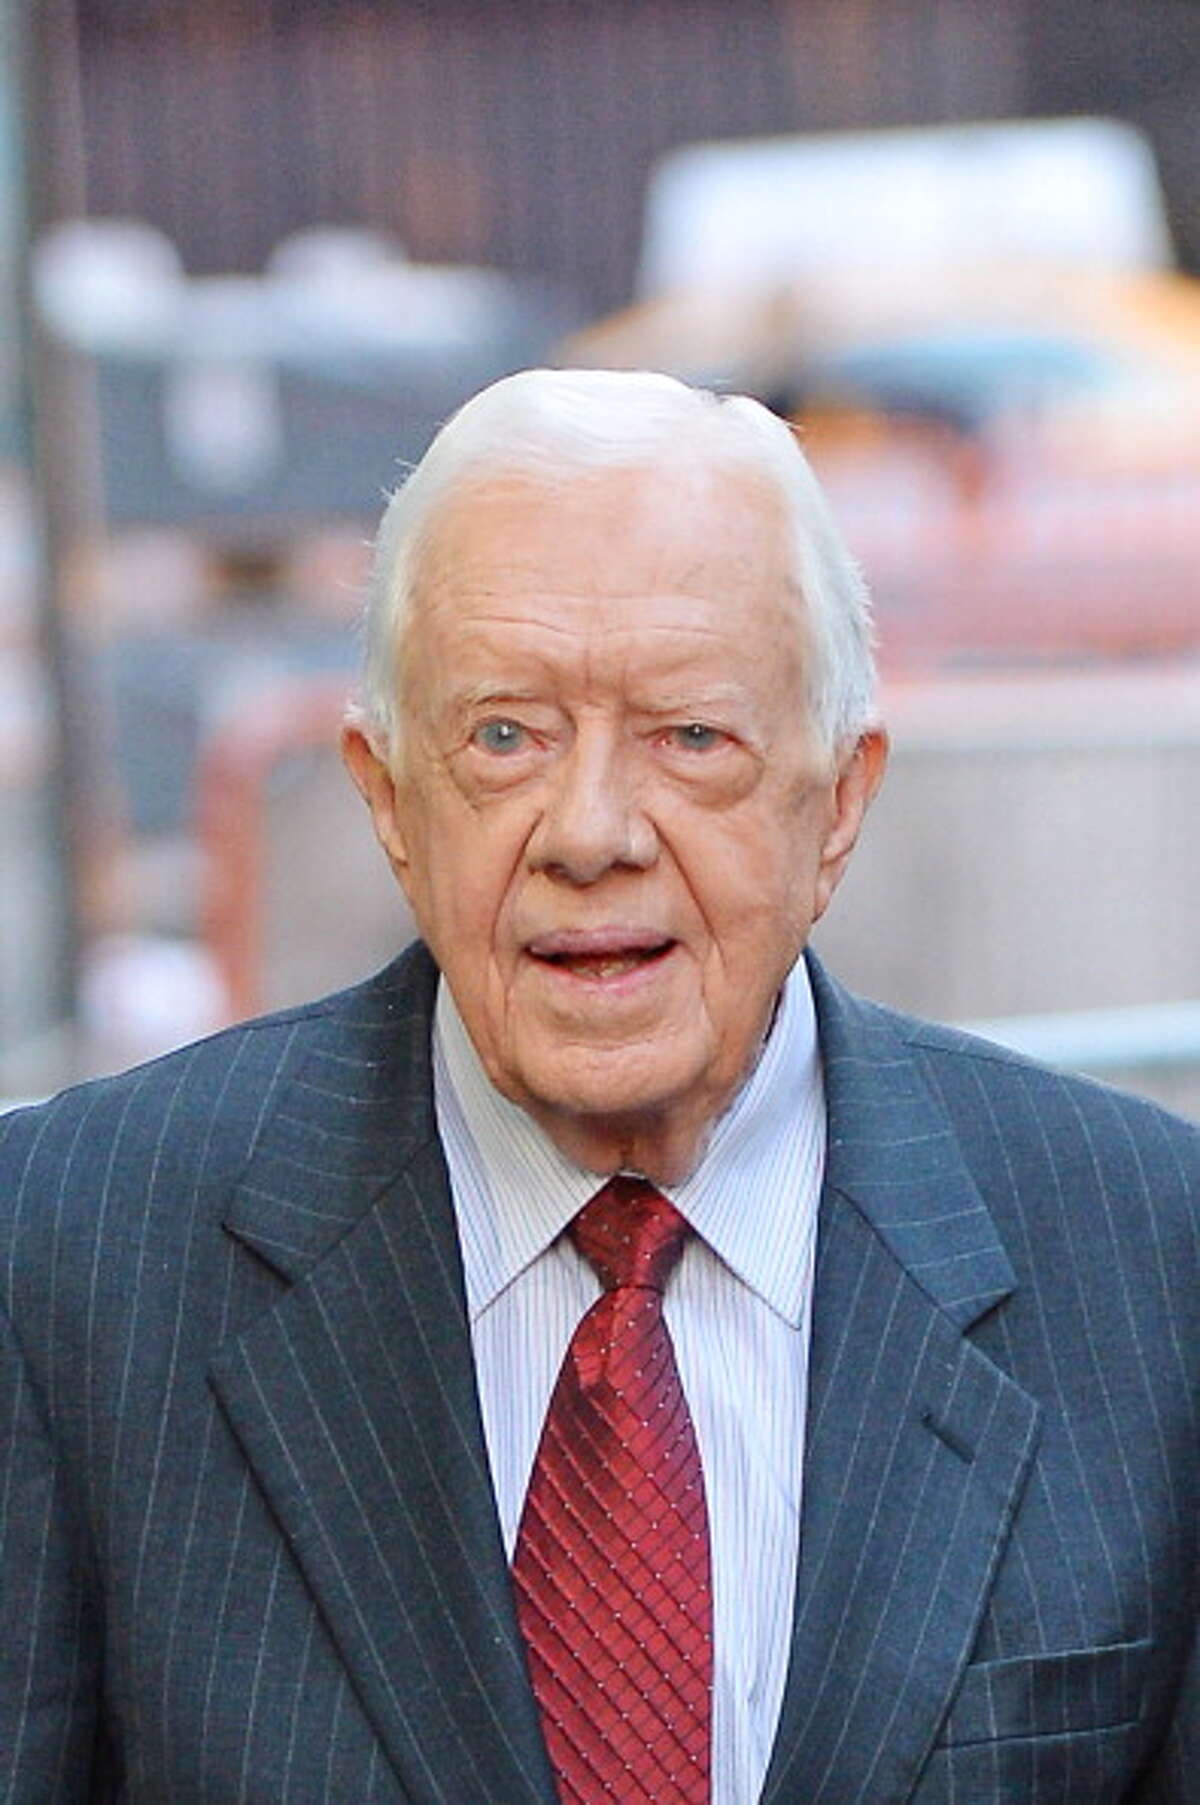 Jimmy Carter Mark Twain once said that “the reports of my death have been greatly exaggerated.” Such was the case for Jimmy Carter after Donald Trump spoke at the annual Conservative Political Action Conference in Washington, D.C., referring to the former president as the “late great Jimmy Carter.” Carter at the time was in fact alive and planning a trip to Venezuela ... amid political unrest.